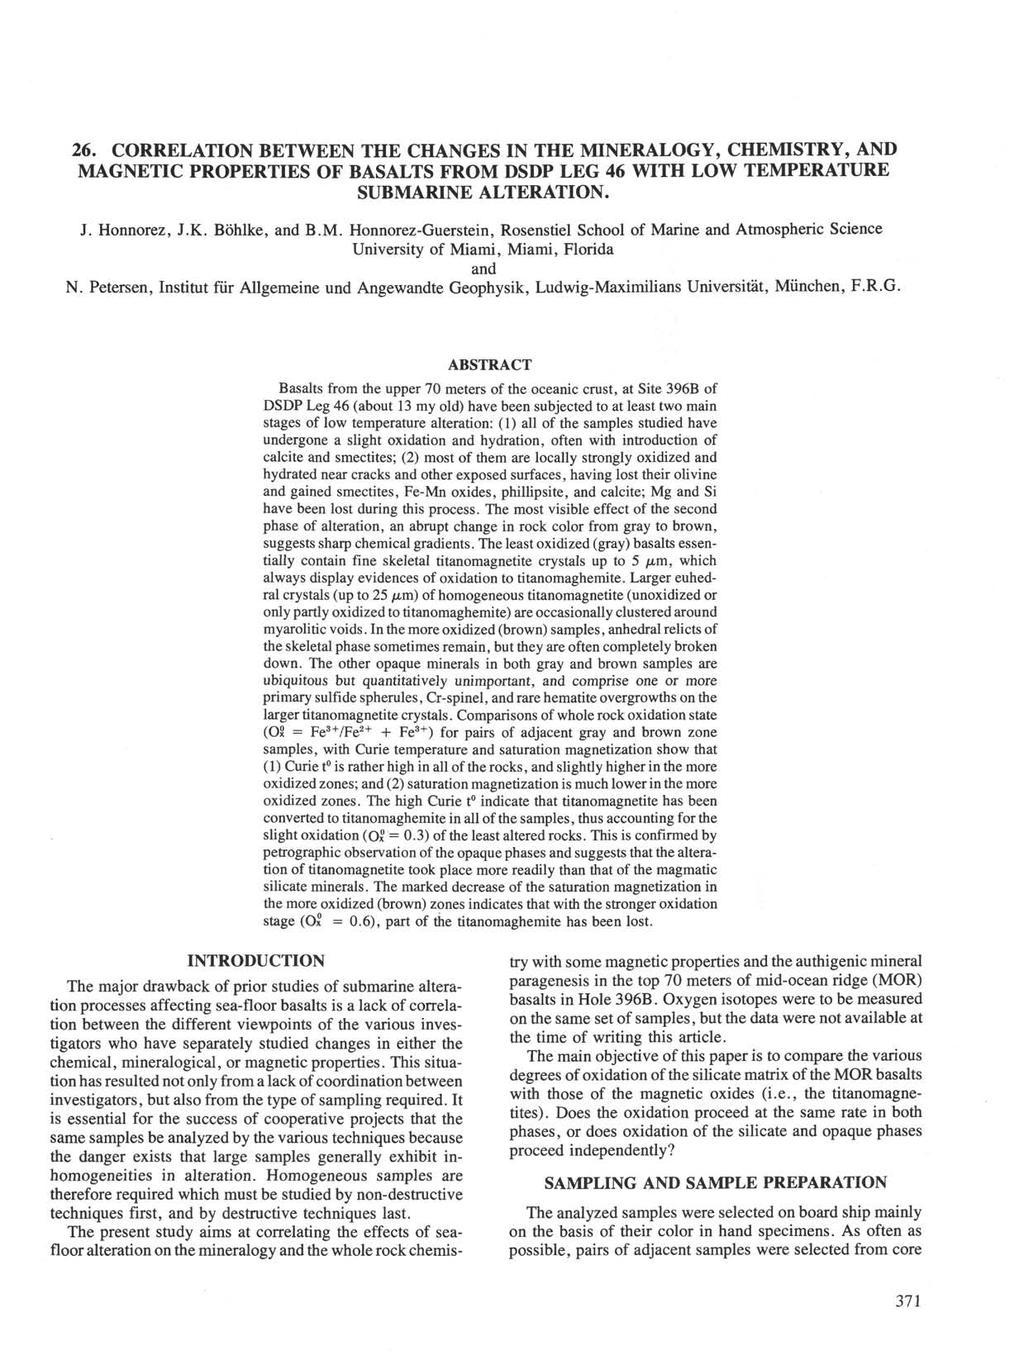 26. CORRELATION BETWEEN THE CHANGES IN THE MINERALOGY, CHEMISTRY, AND MAGNETIC PROPERTIES OF BASALTS FROM DSDP LEG 46 WITH LOW TEMPERATURE SUBMARINE ALTERATION. J. Honnorez, J.K. Böhlke, and B.M. Honnorez-Guerstein, Rosenstiel School of Marine and Atmospheric Science University of Miami, Miami, Florida and N.